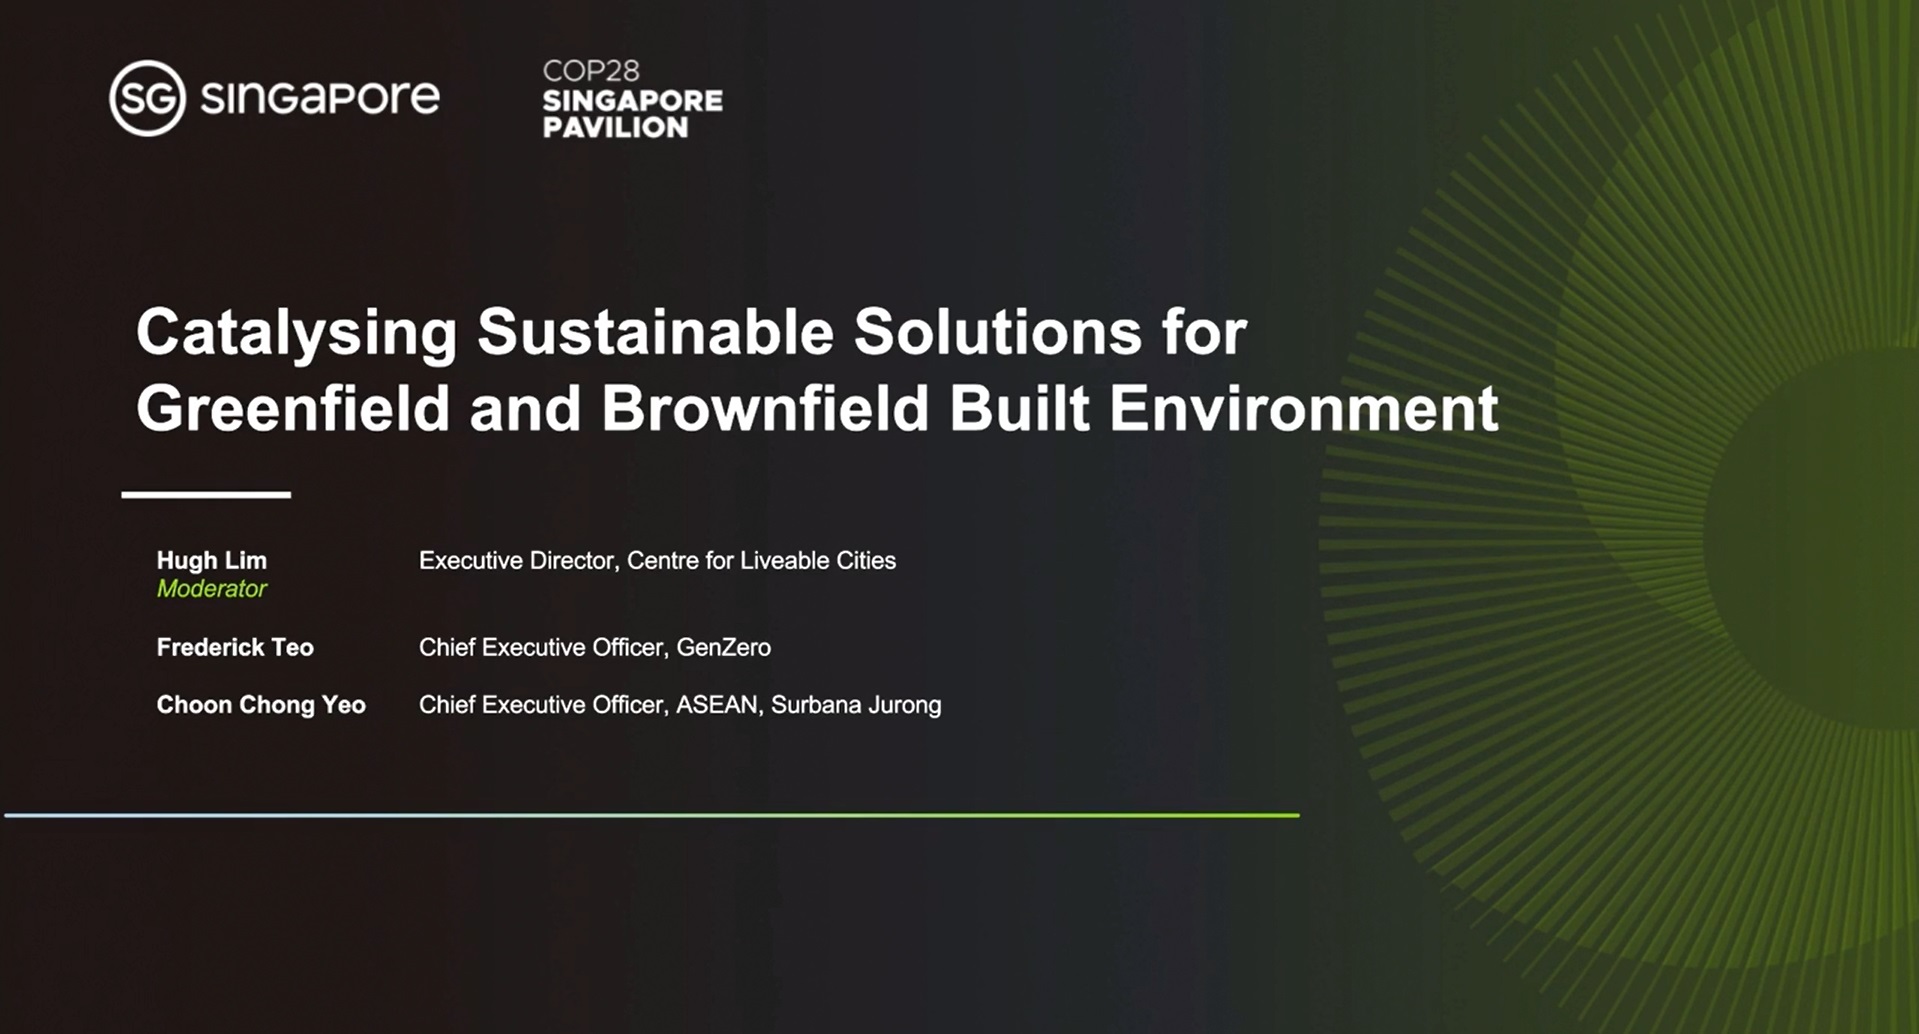 Catalysing Sustainable Solutions for Greenfield and Brownfield Built Environment